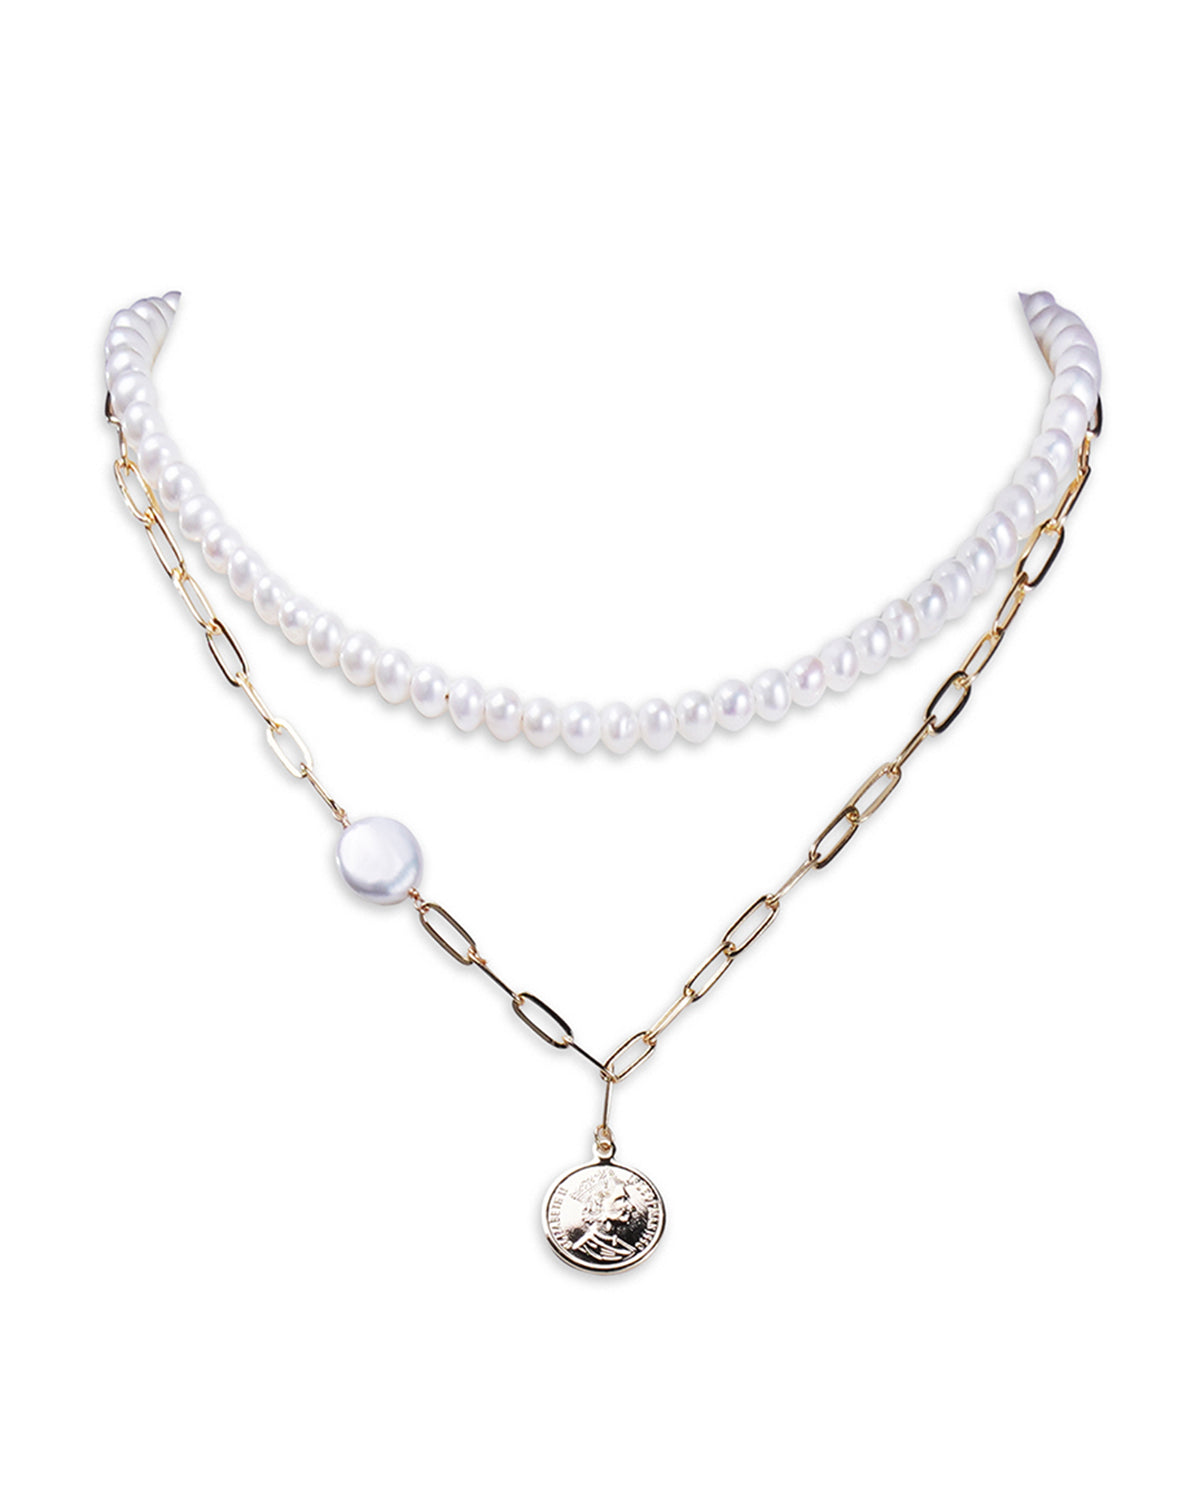 Star magnetic buckle design 5-6mm simple freshwater pearl necklace/suitable for stacking